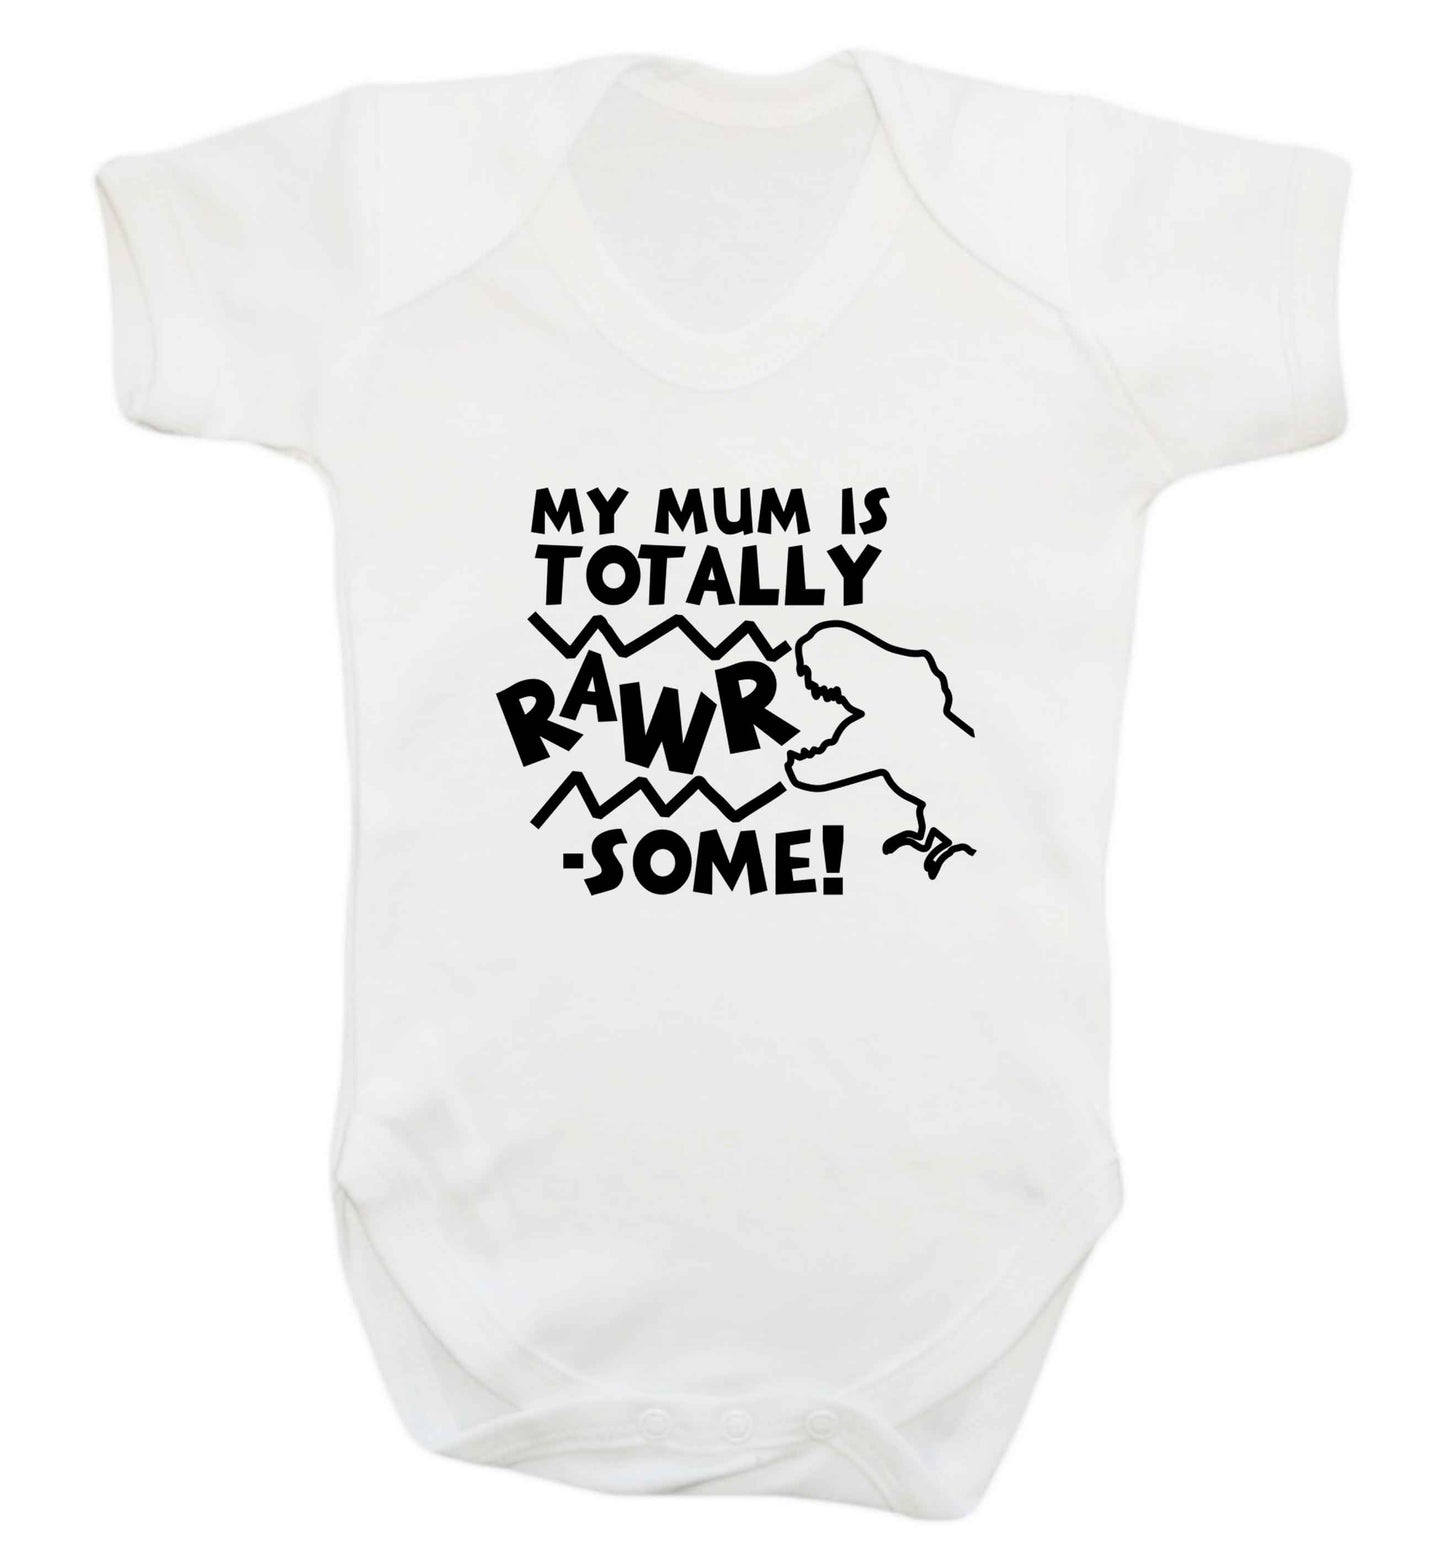 My mum is totally rawrsome baby vest white 18-24 months